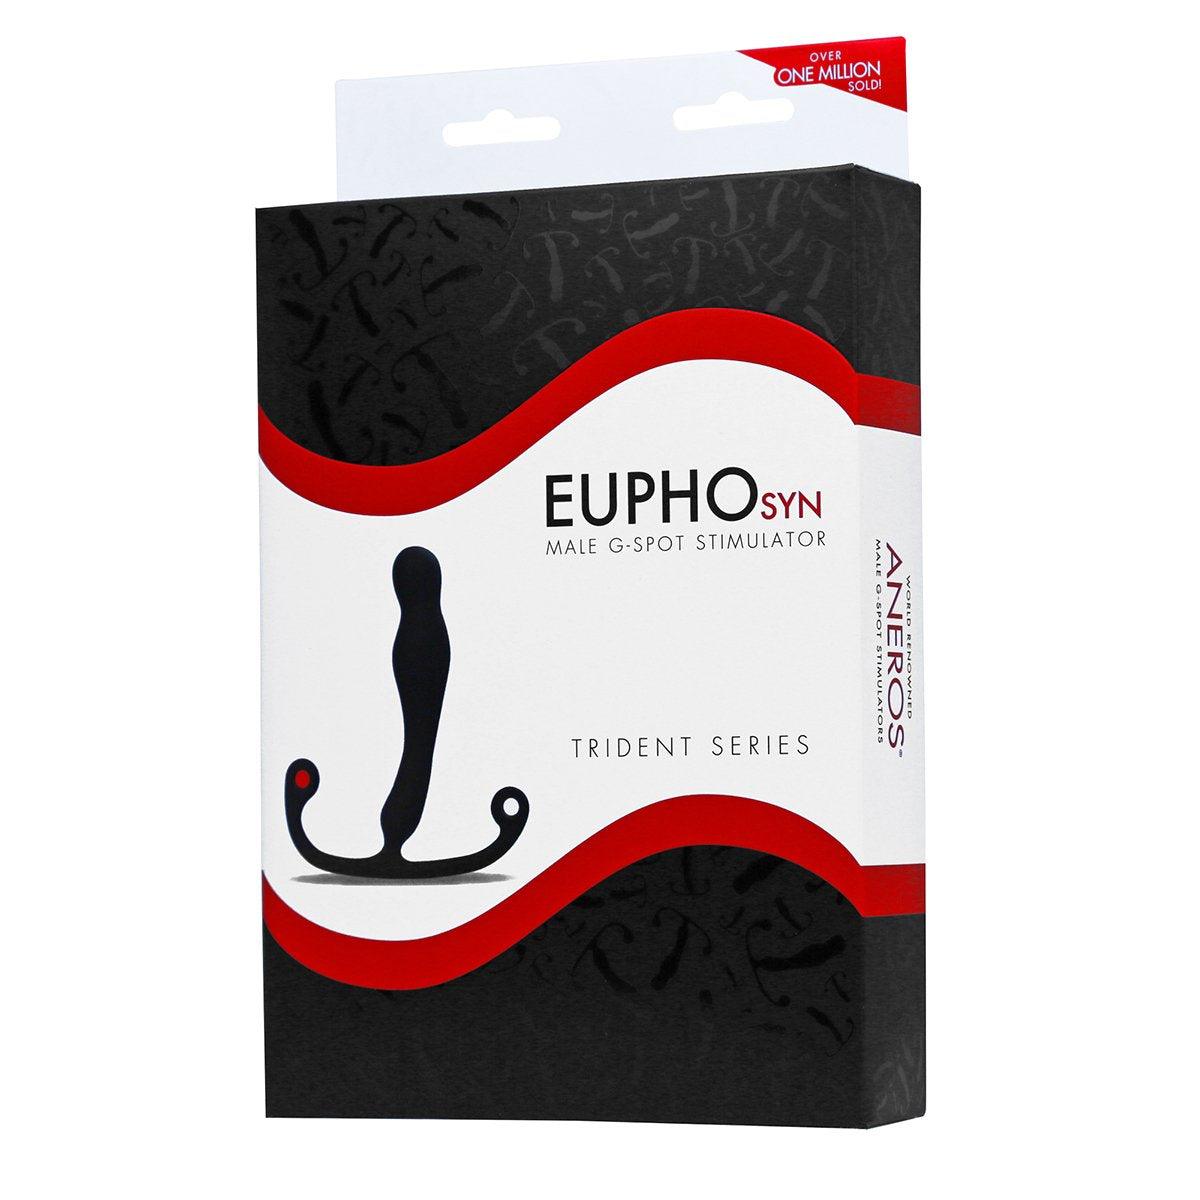 Eupho Syn Trident Series Prostate Massager - Buy At Luxury Toy X - Free 3-Day Shipping